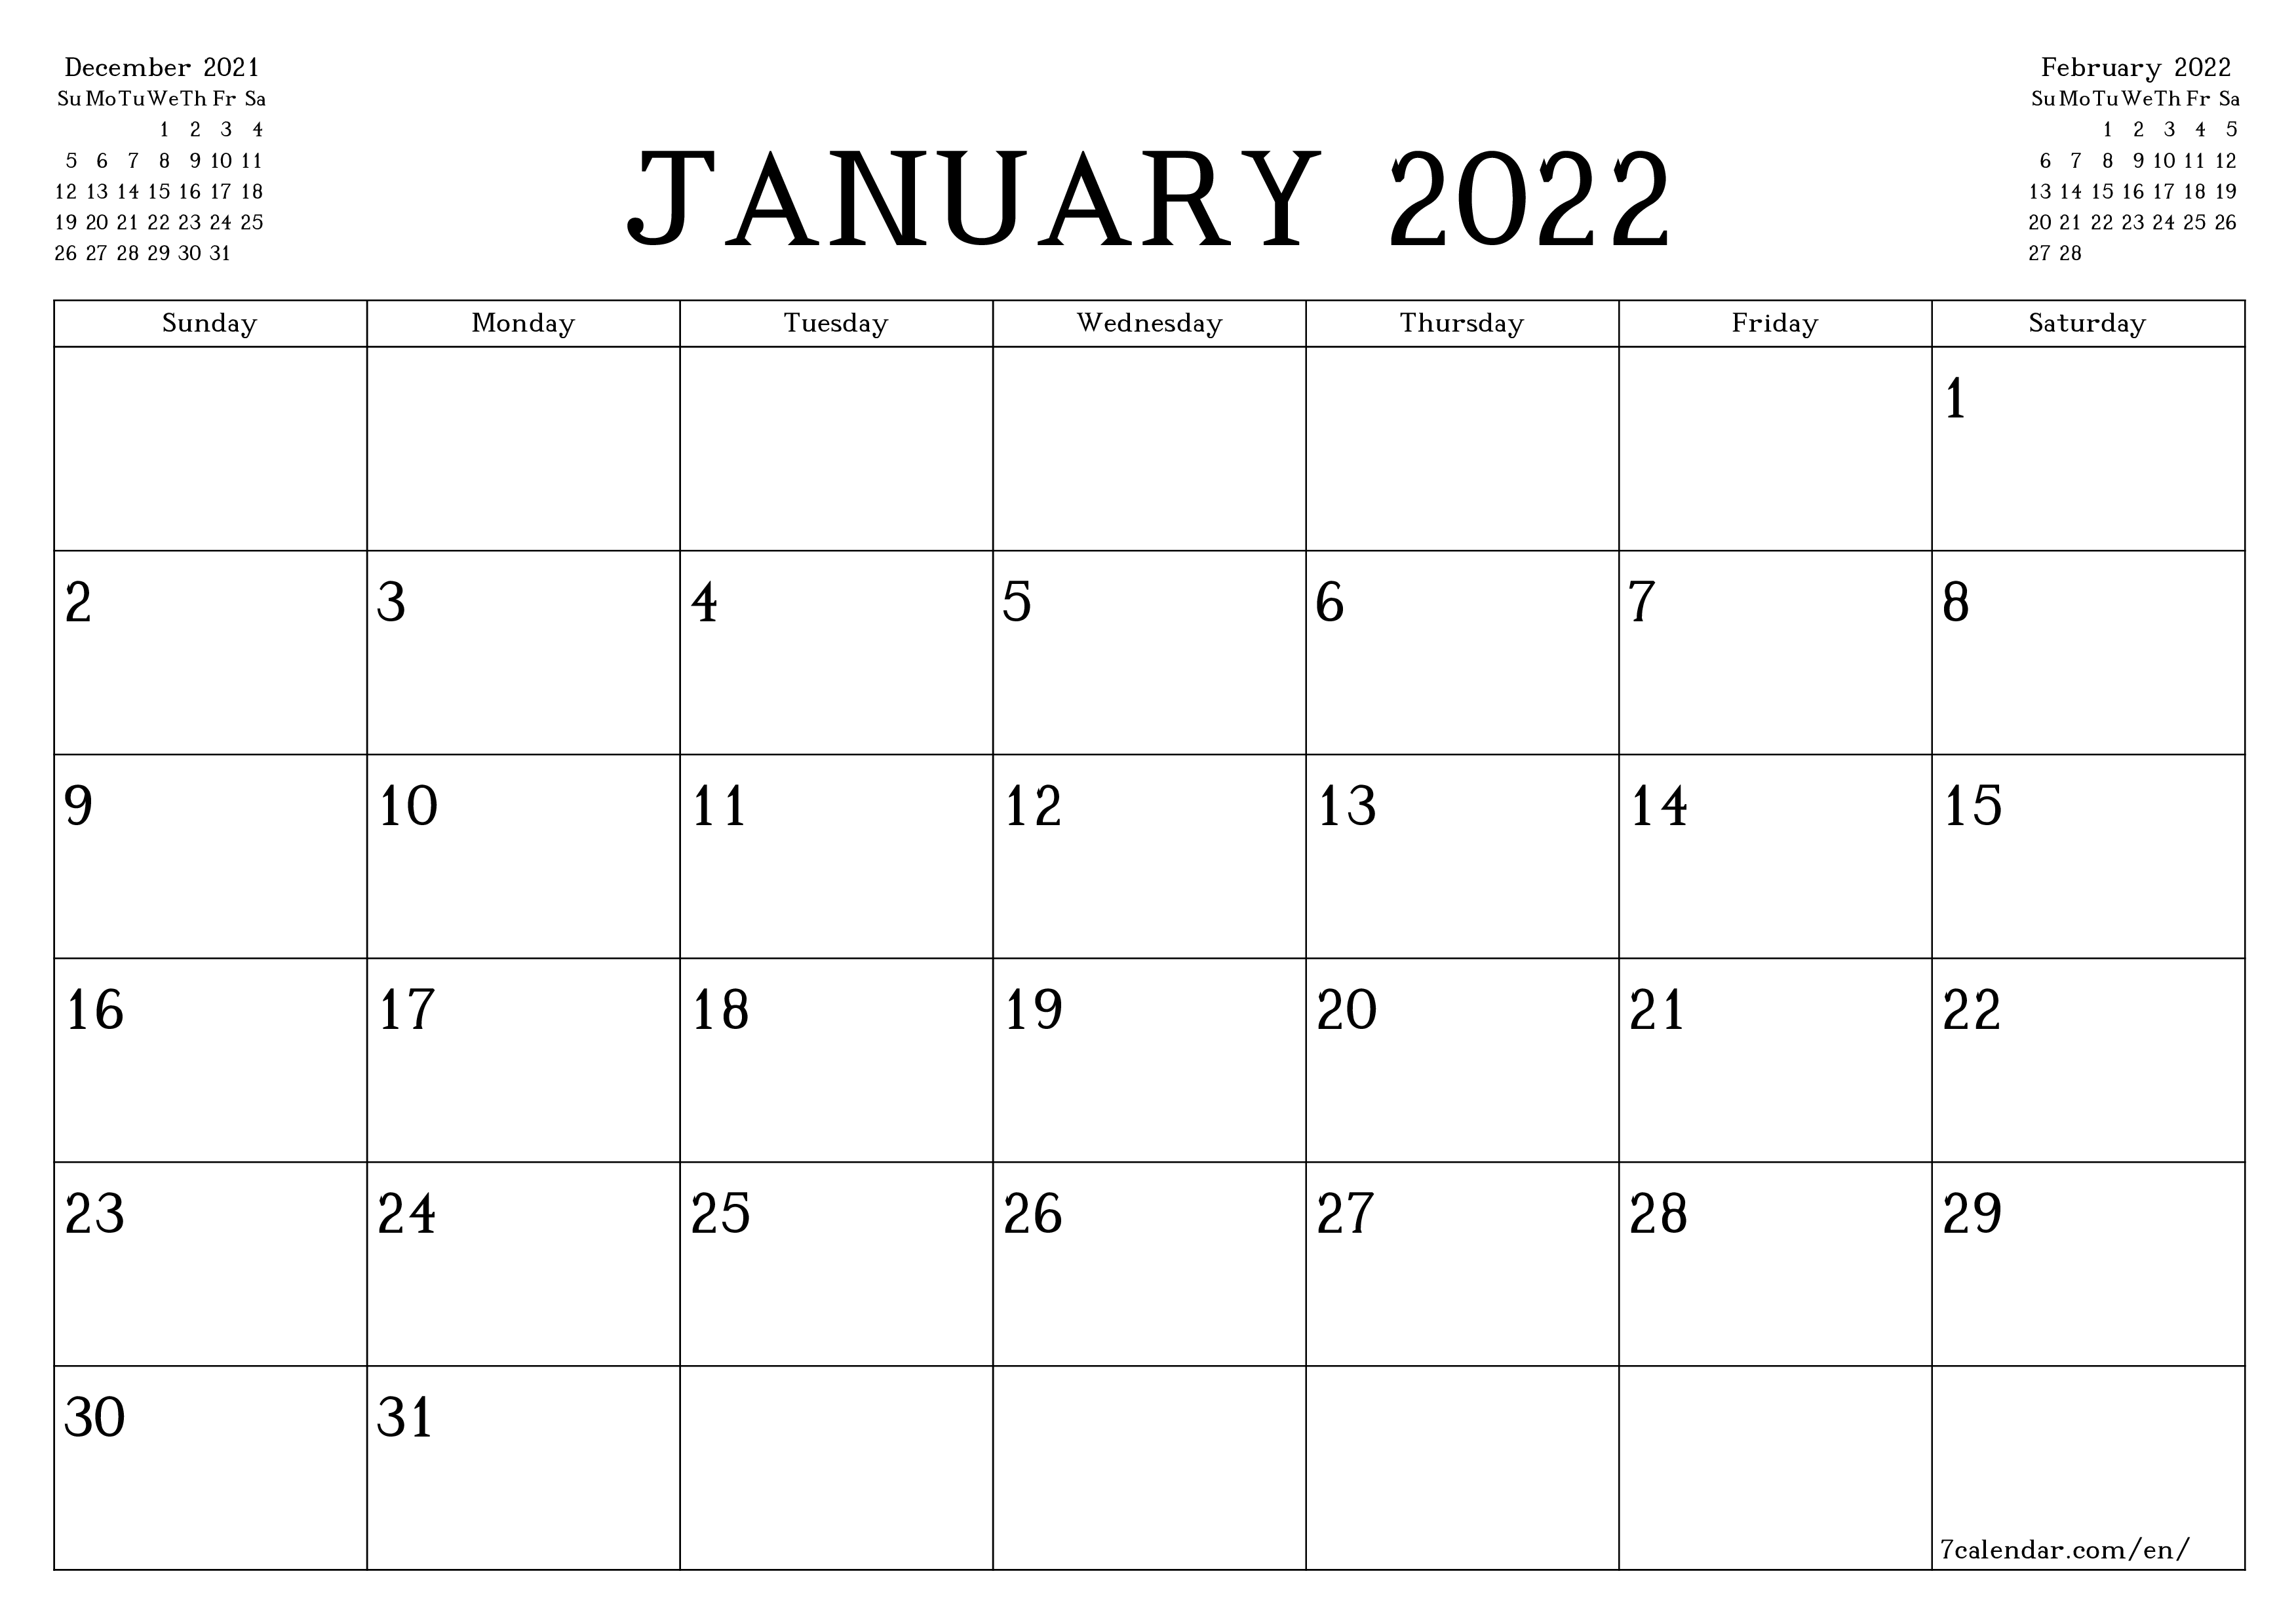 Monthly Planning Calendar 2022 January 2022 Free Printable Calendars And Planners, Pdf Templates -  7Calendar